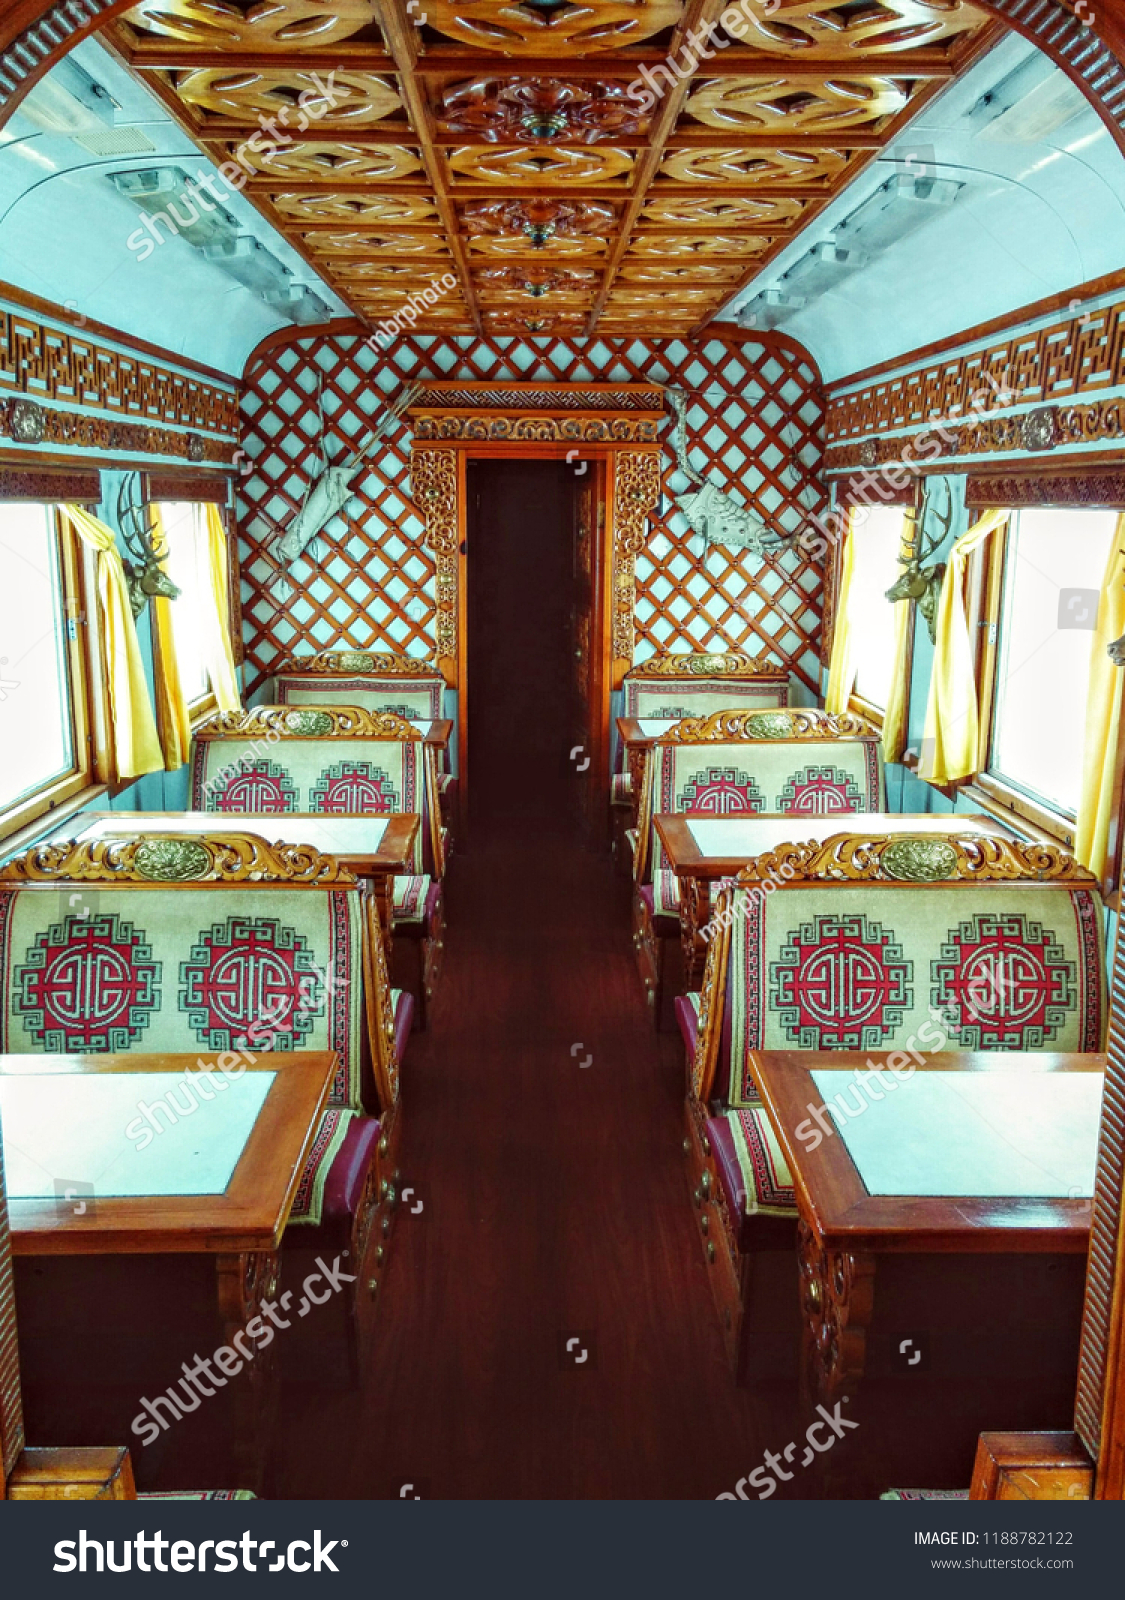 Restaurant carriage onboard the Trans Siberian Railway. Mongolia #1188782122